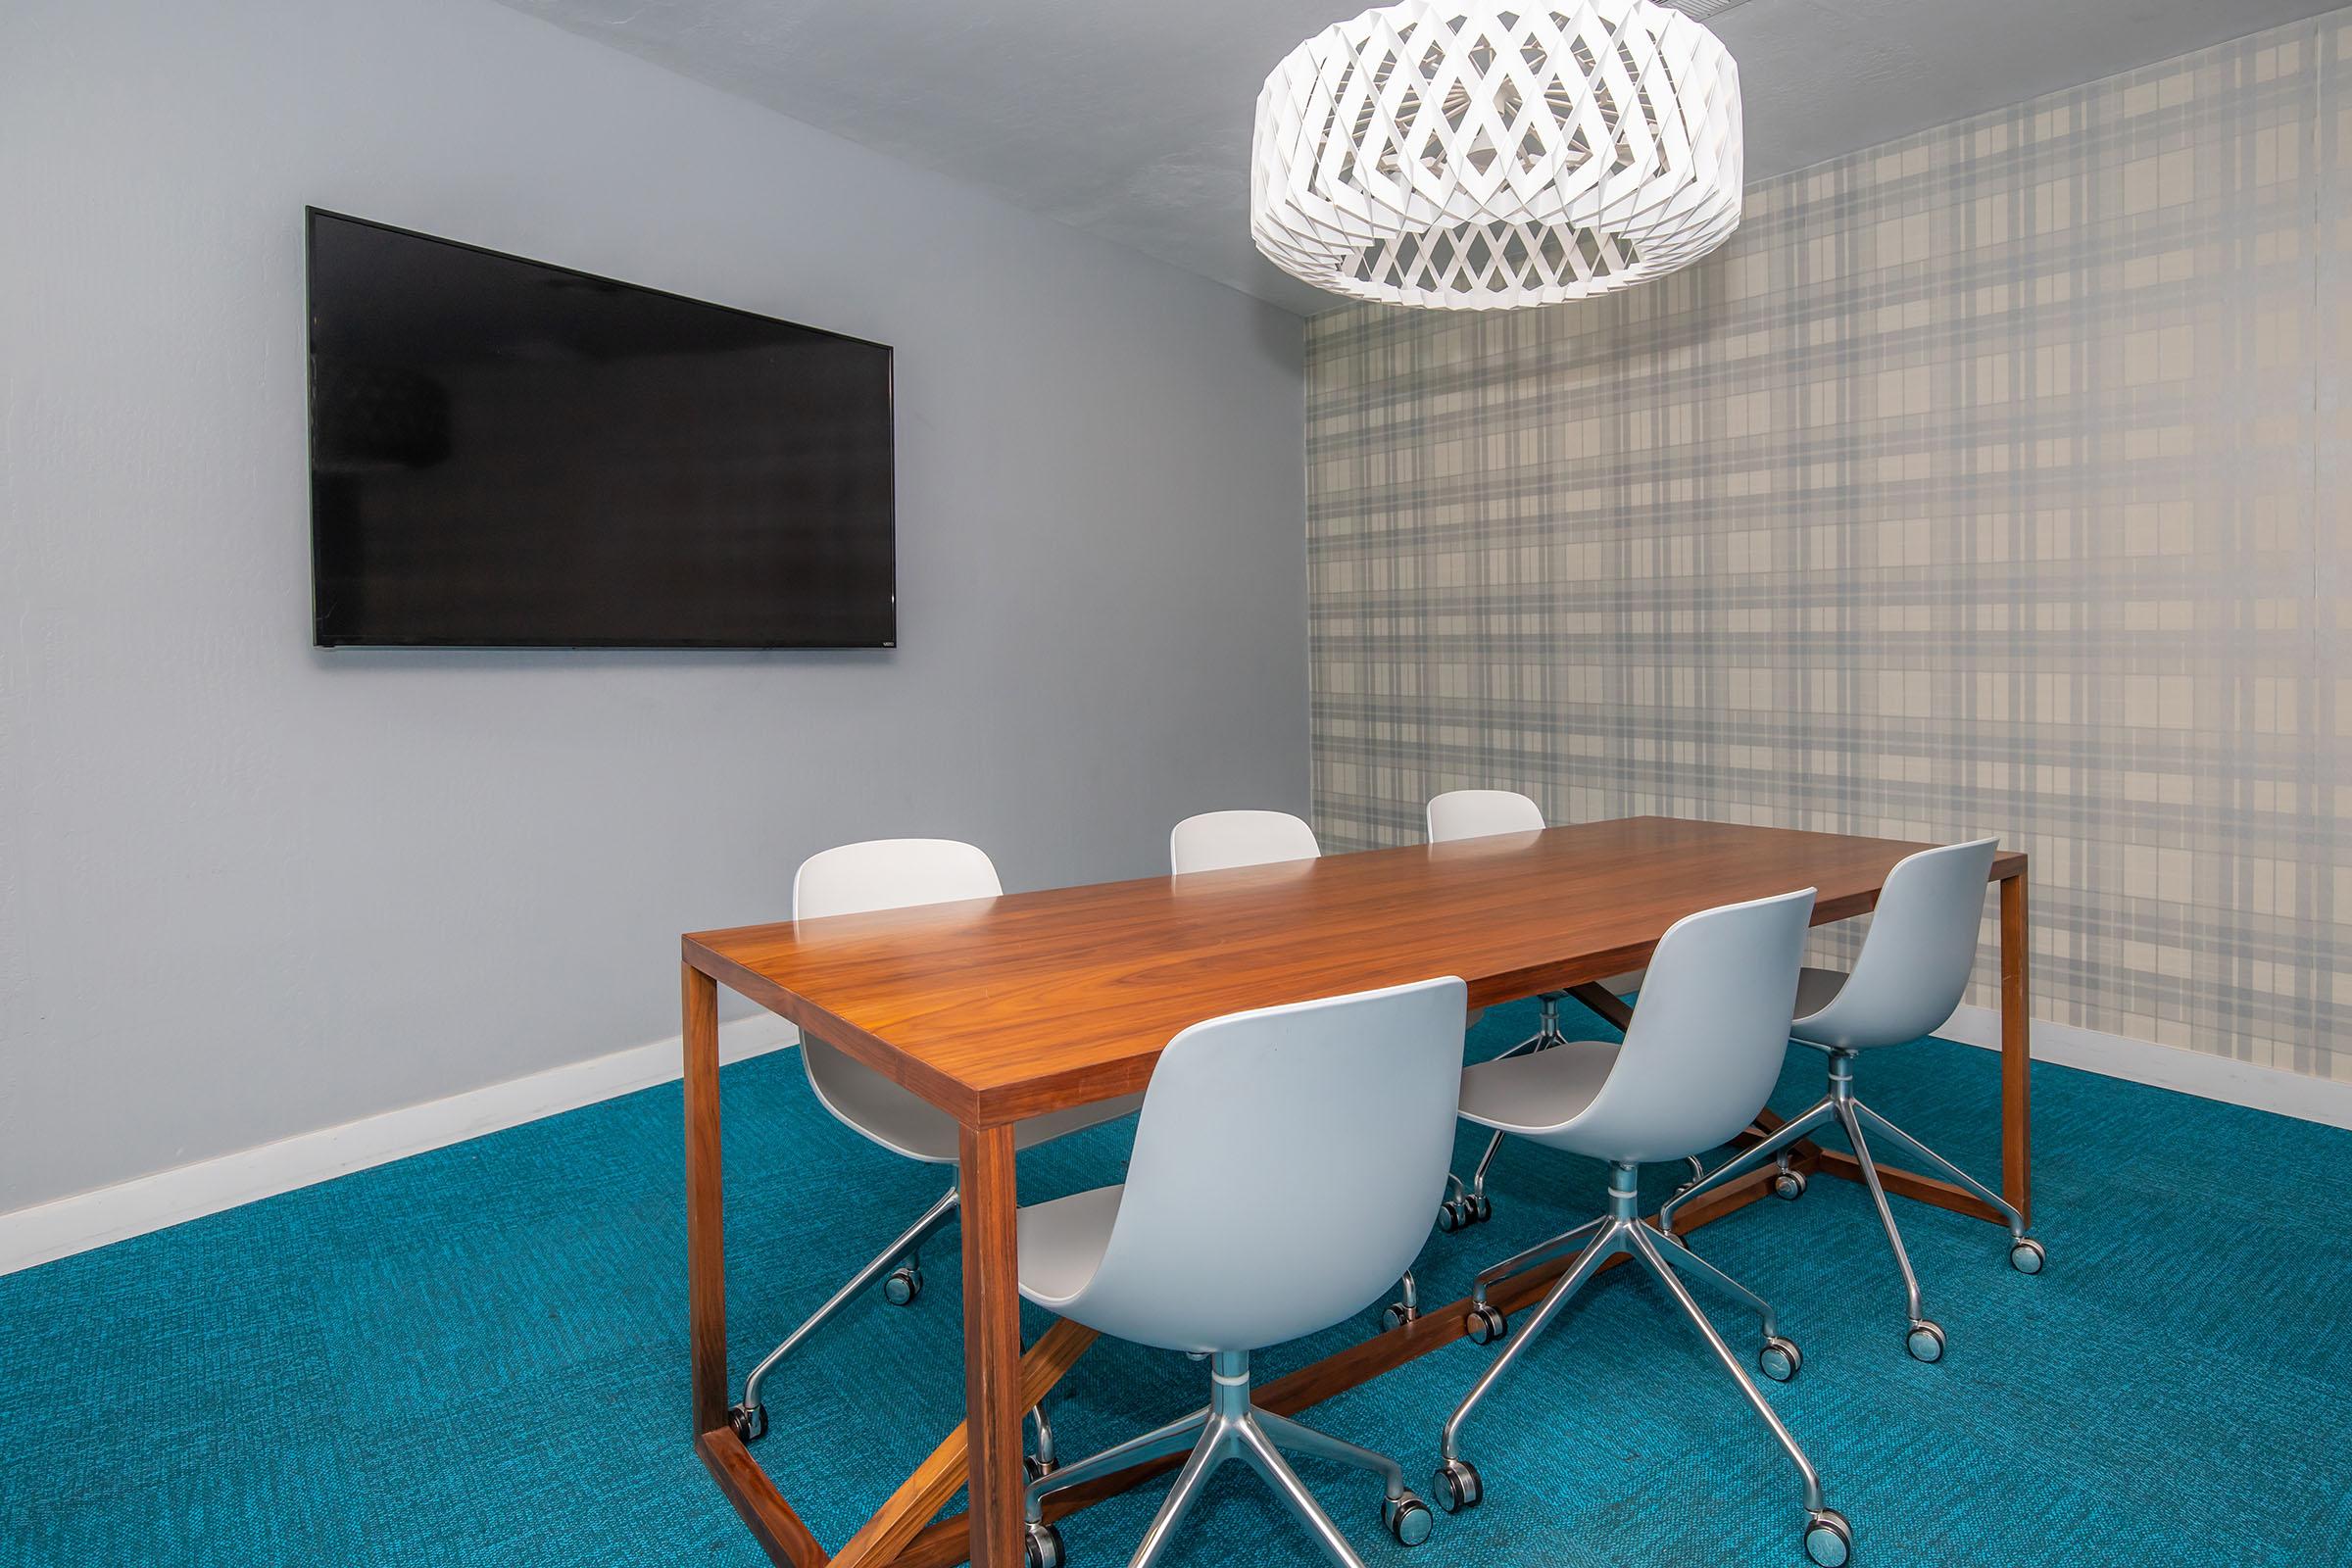 Community conference room with blue carpeting, large wooden table, rolling chairs, and flat screen TV